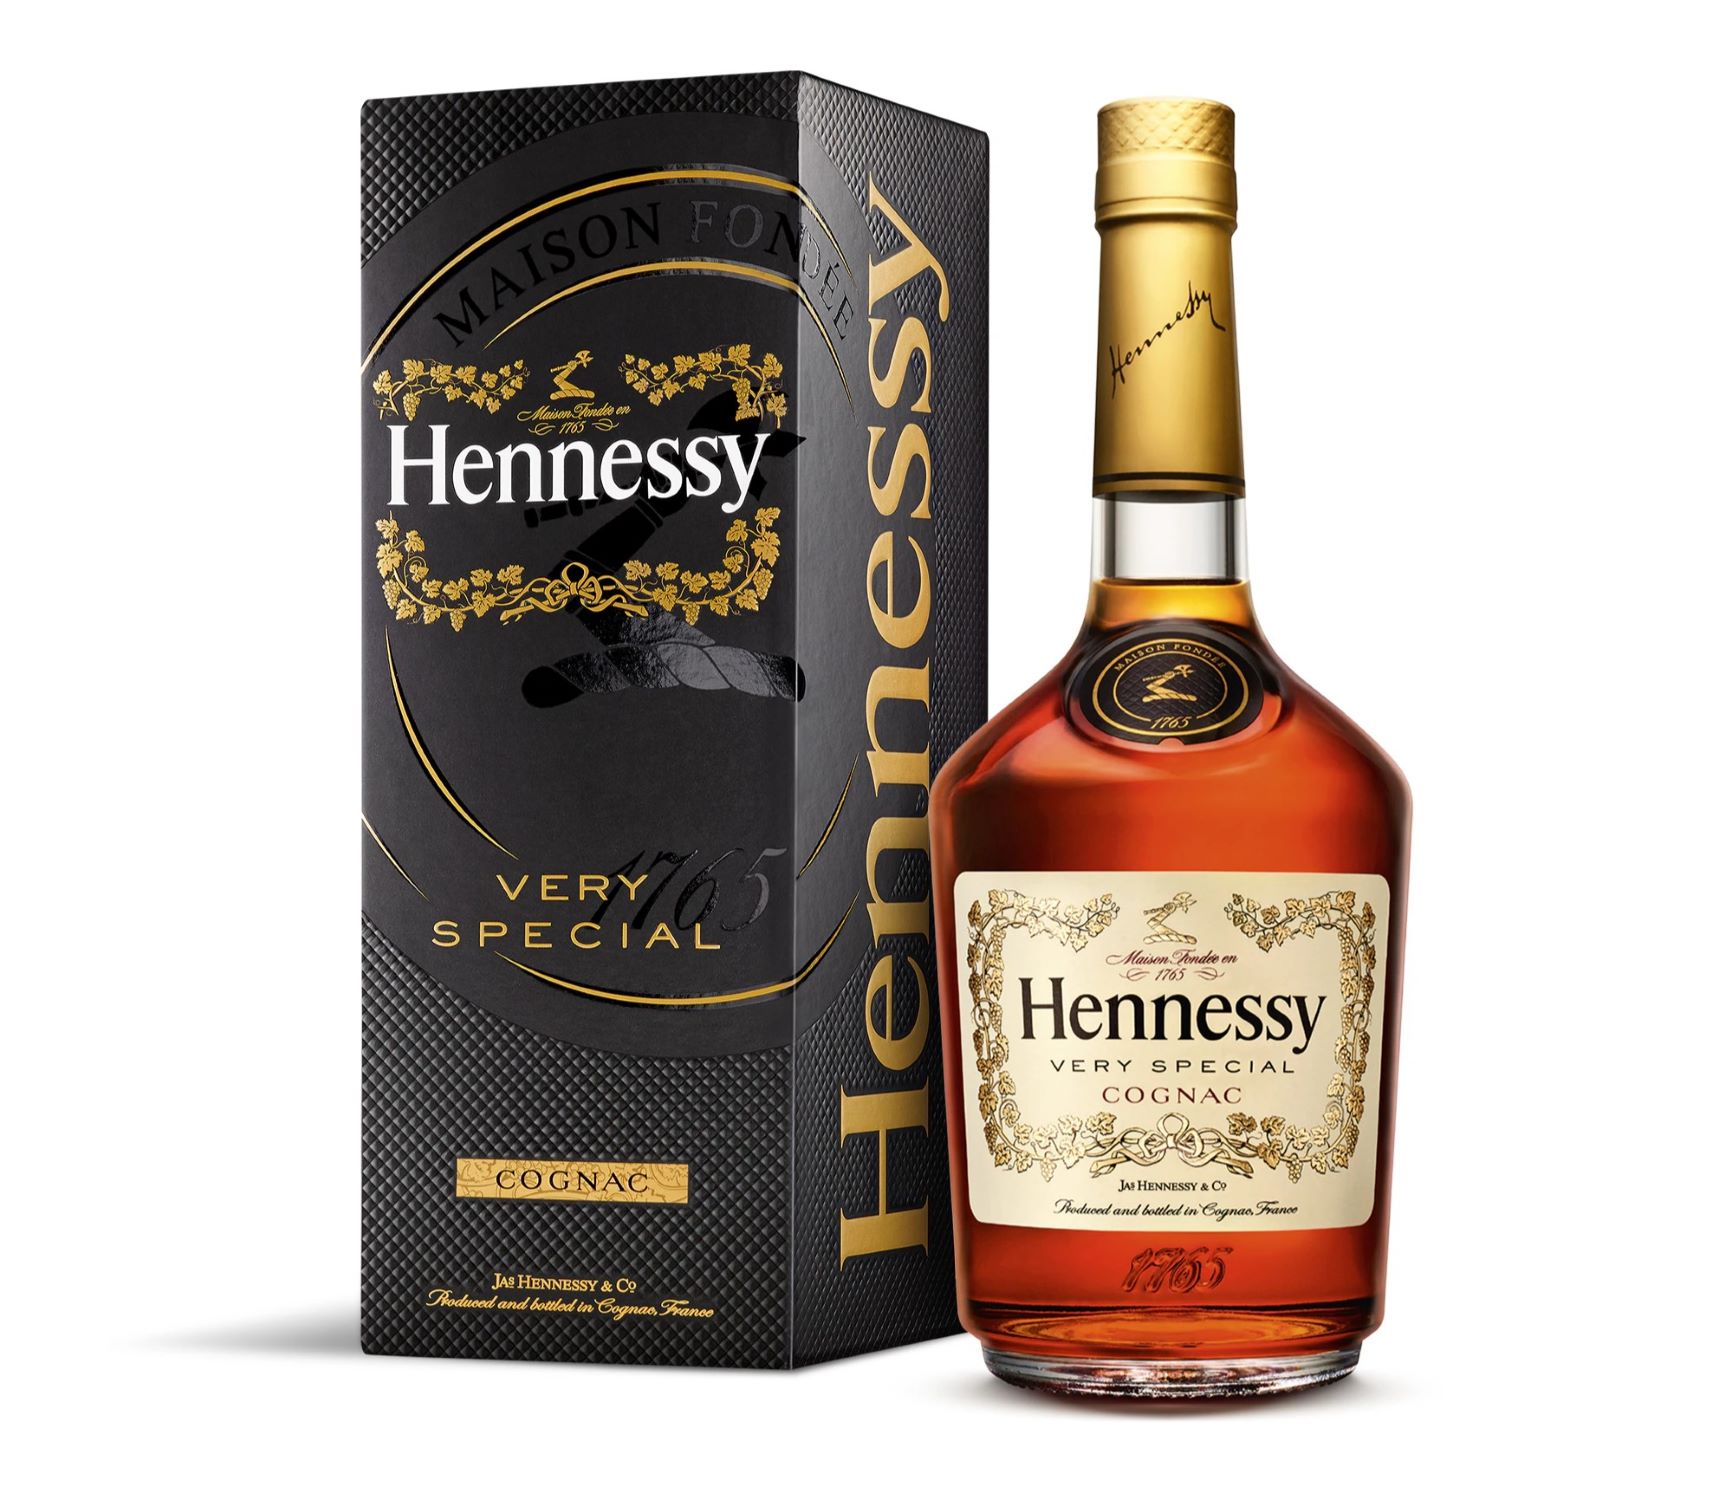 20-hennessy-cognac-nutrition-facts